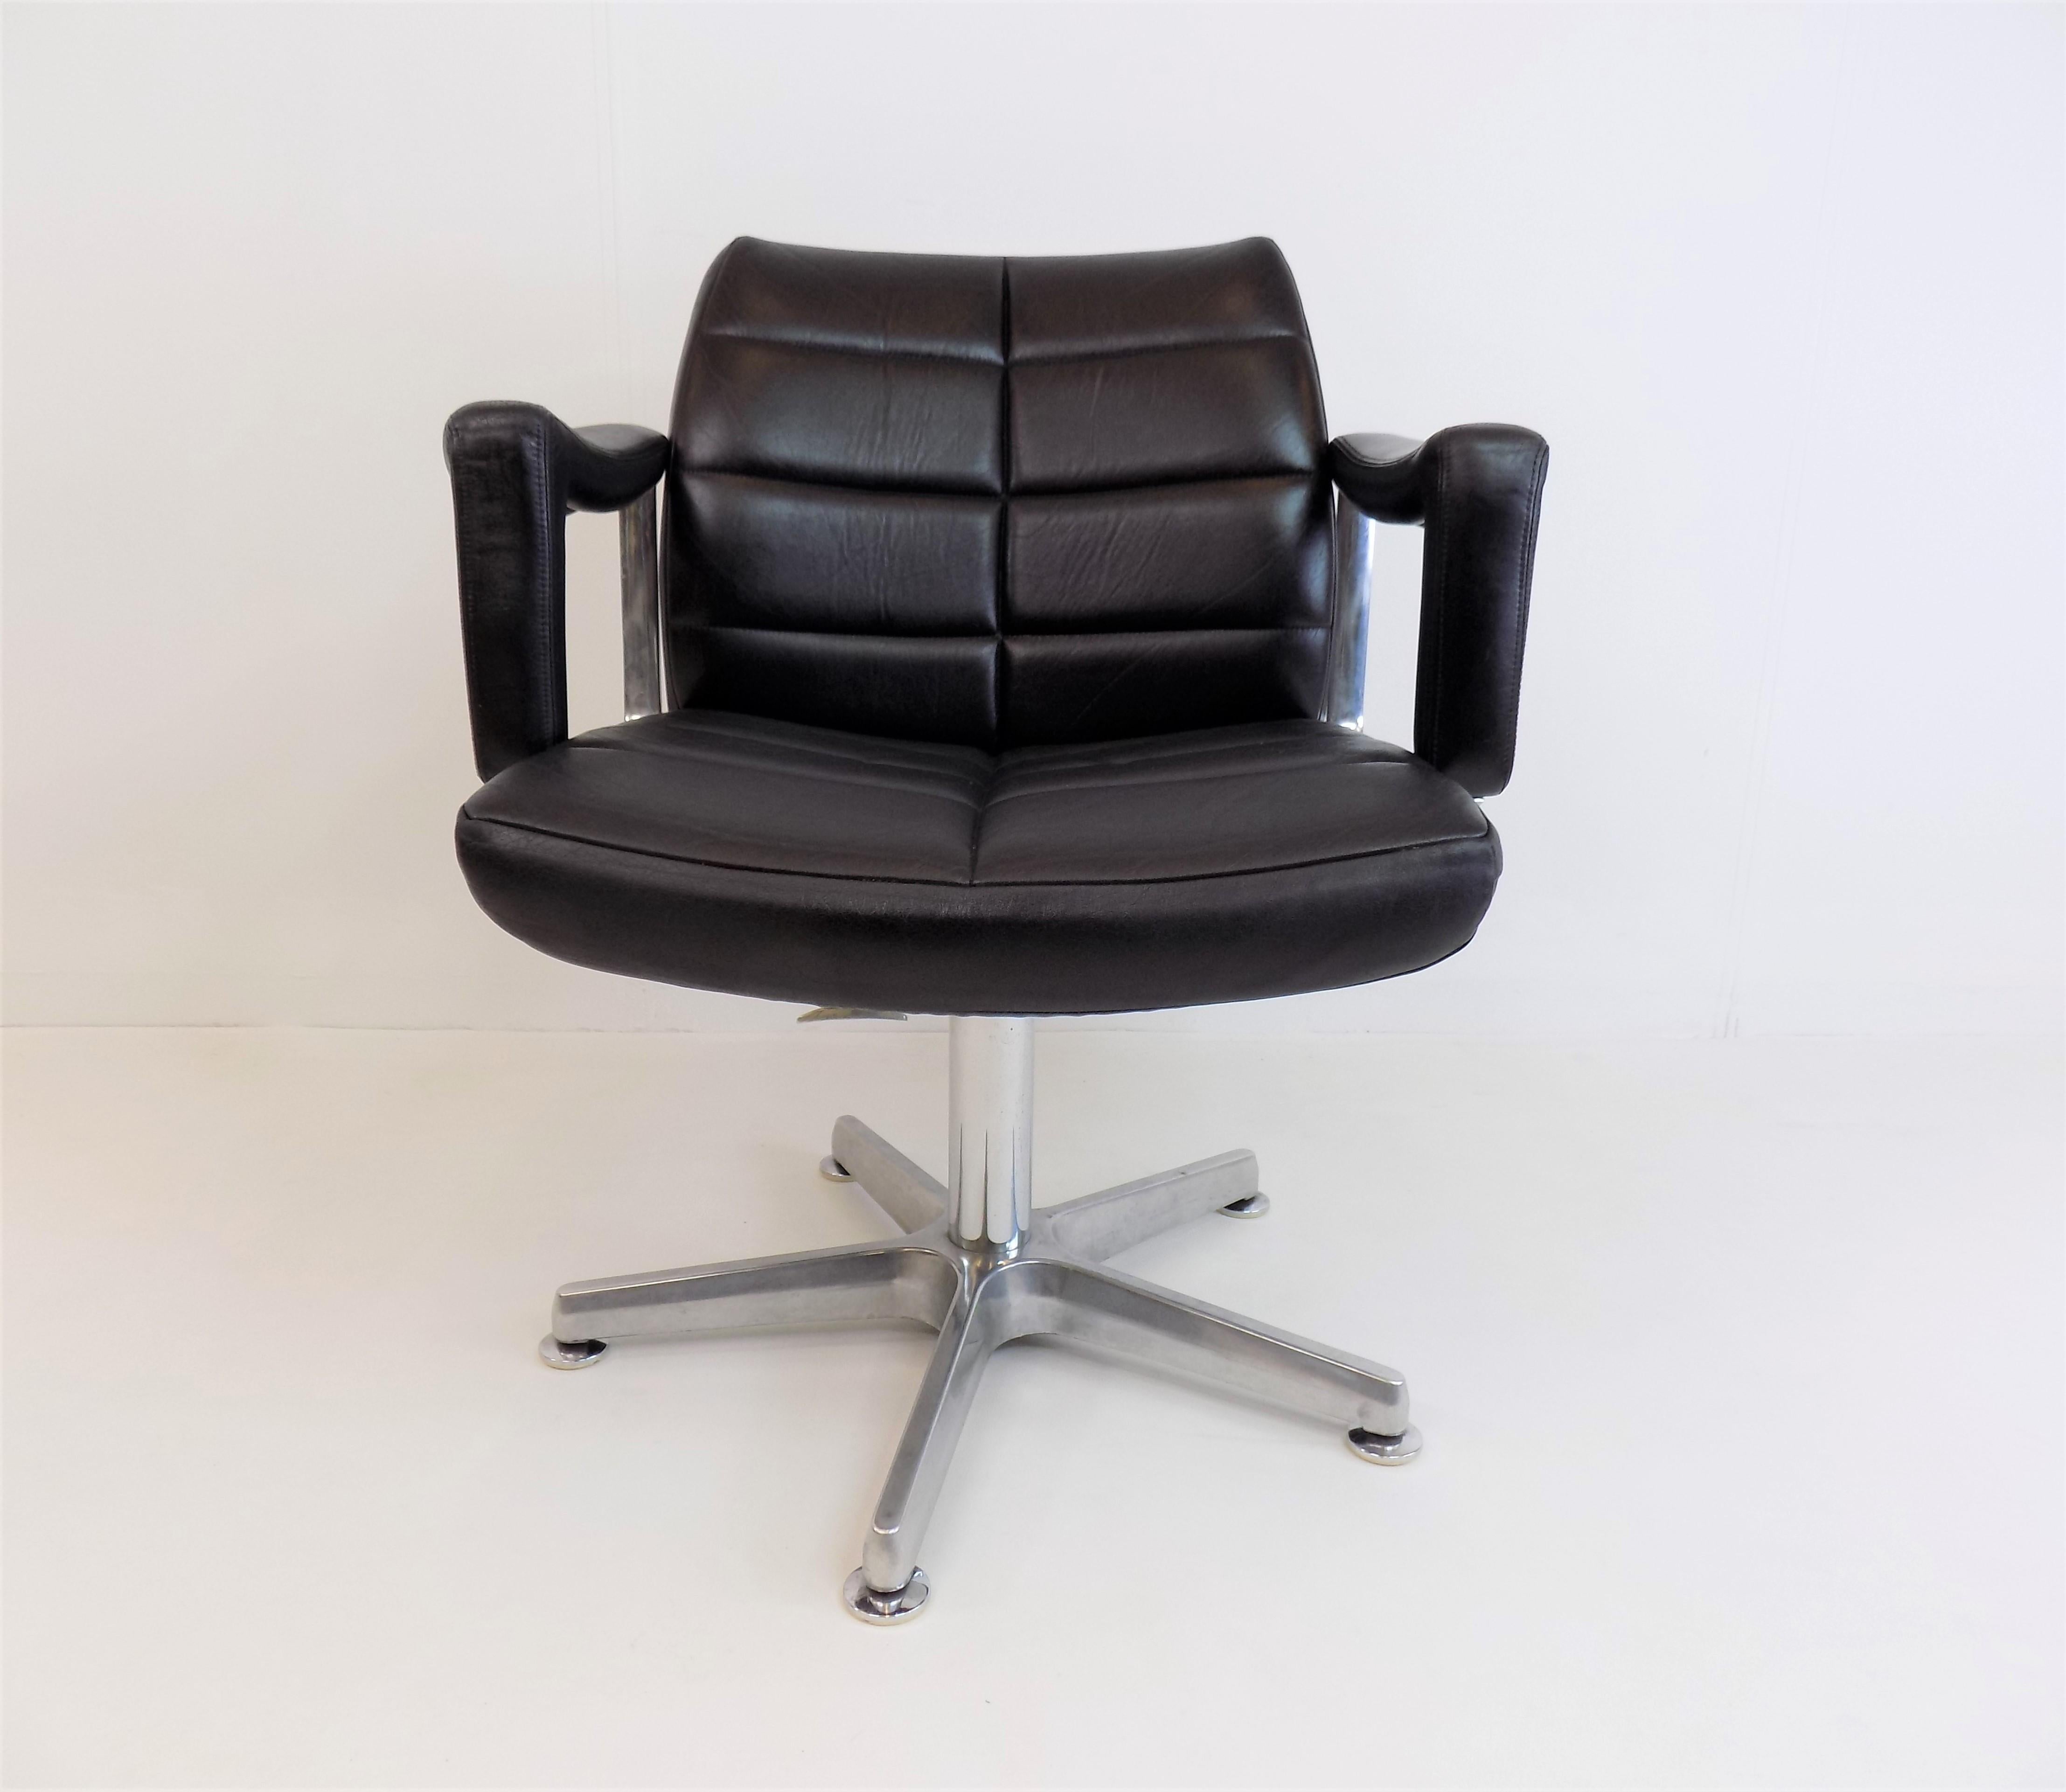 This Röder Söhne office chair is in excellent condition. The black leather is soft and only has a light patina on the armrests. The armchair is rotatable and has a tilting function. This design by Miller Borgsen from the 1960s always impresses with